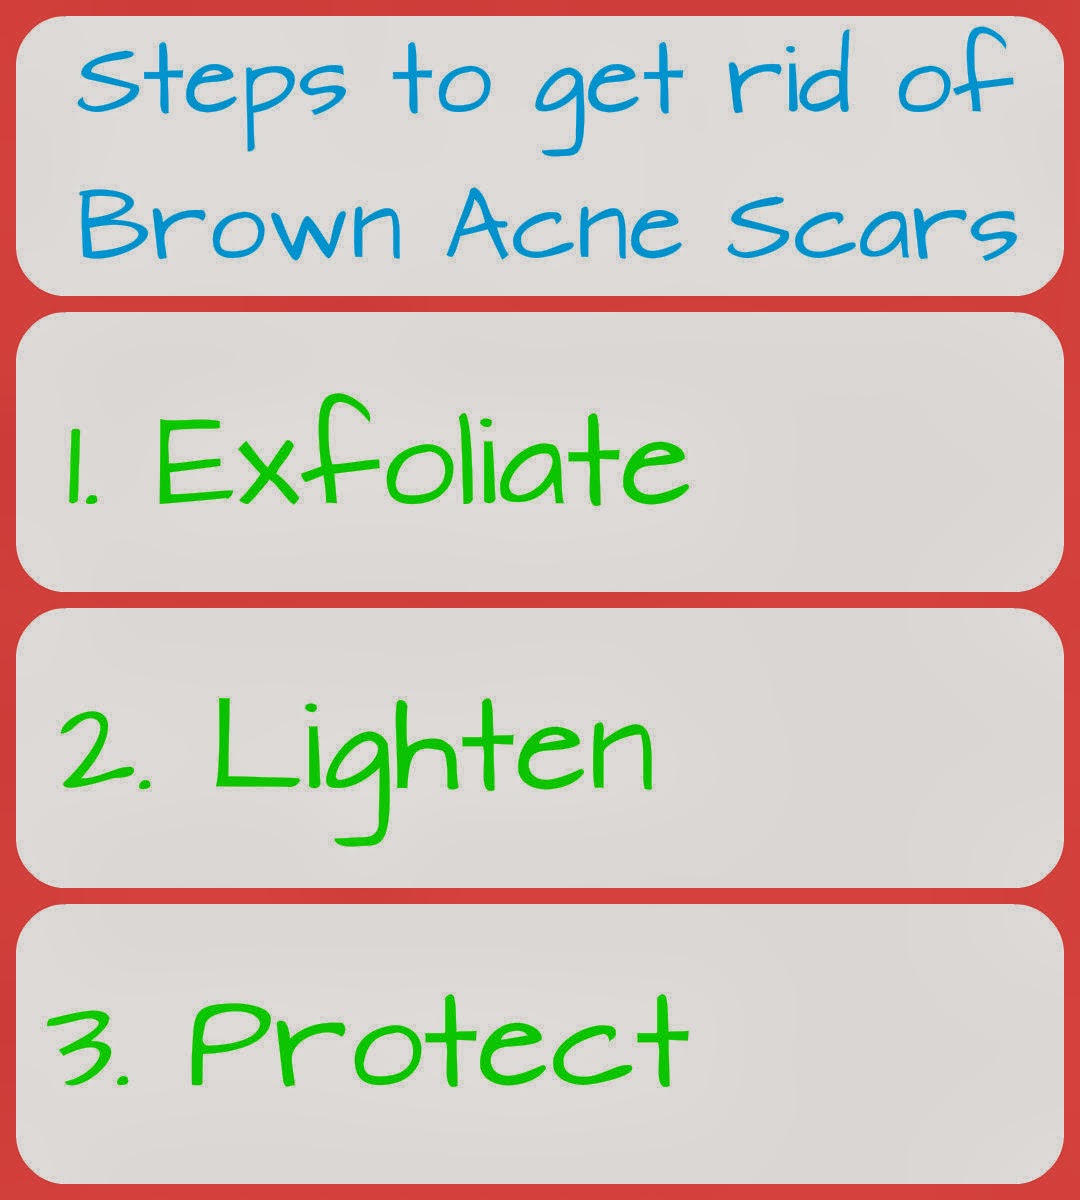 Steps+to+get+rid+of+acne+scars.jpg